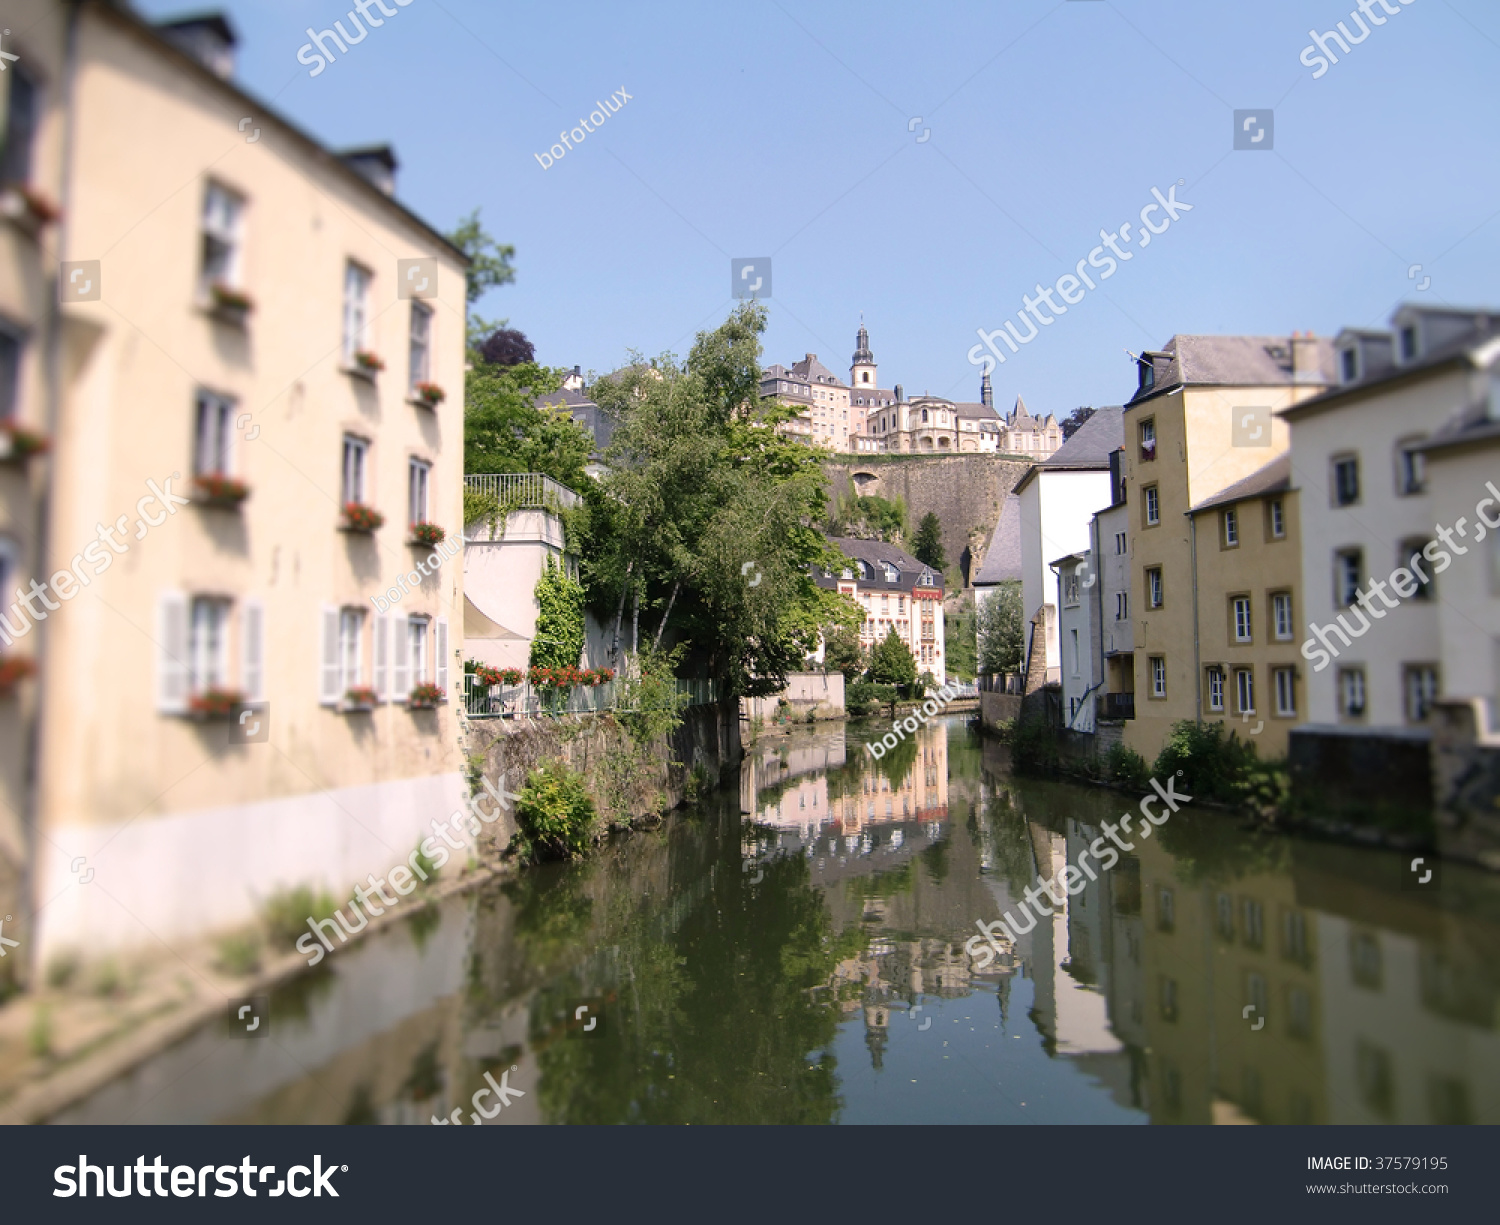 Luxembourg (Old Town) - The Alzette Valley Stock Photo 37579195 ...